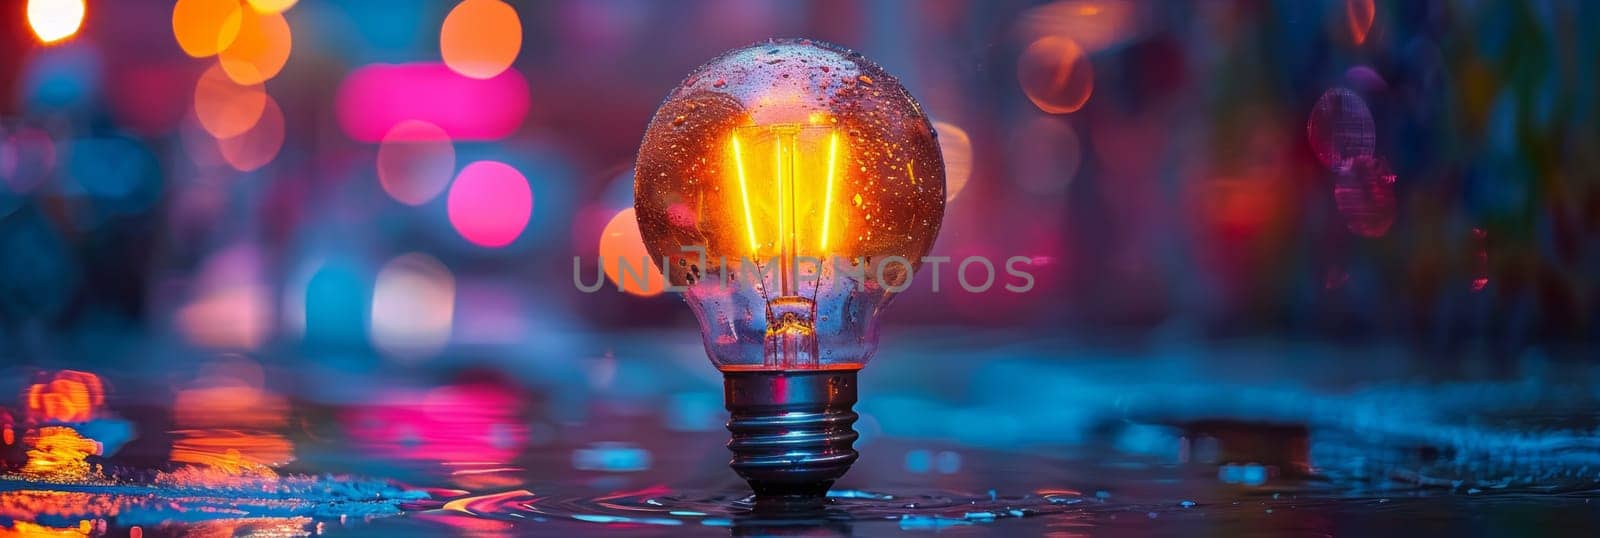 A light bulb is lit up in the middle of a puddle